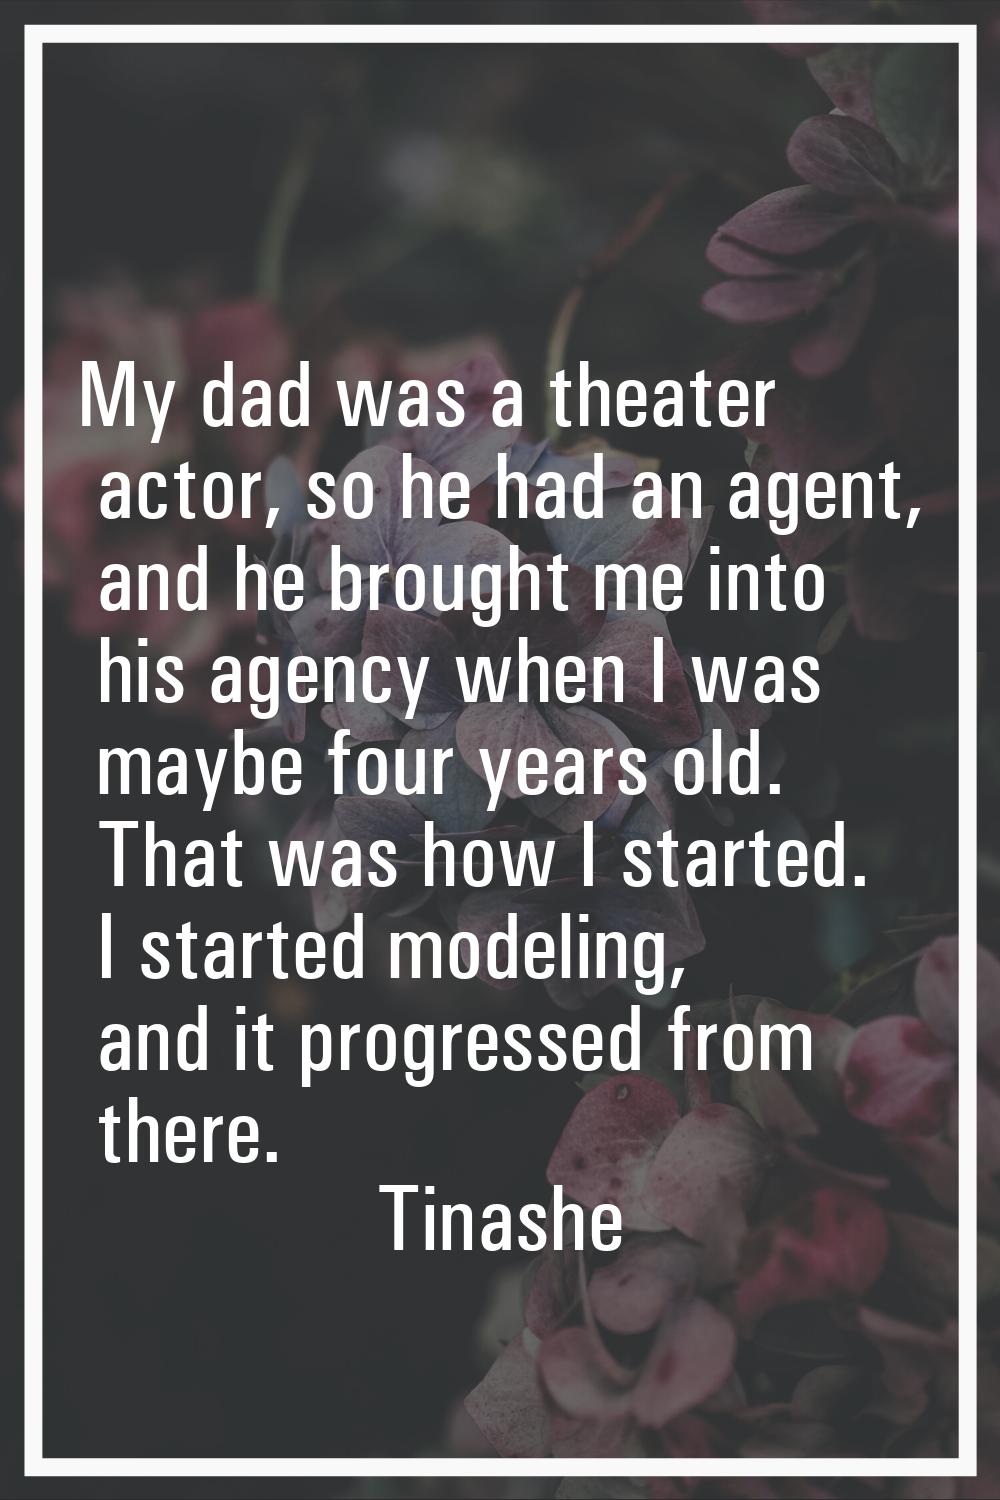 My dad was a theater actor, so he had an agent, and he brought me into his agency when I was maybe 